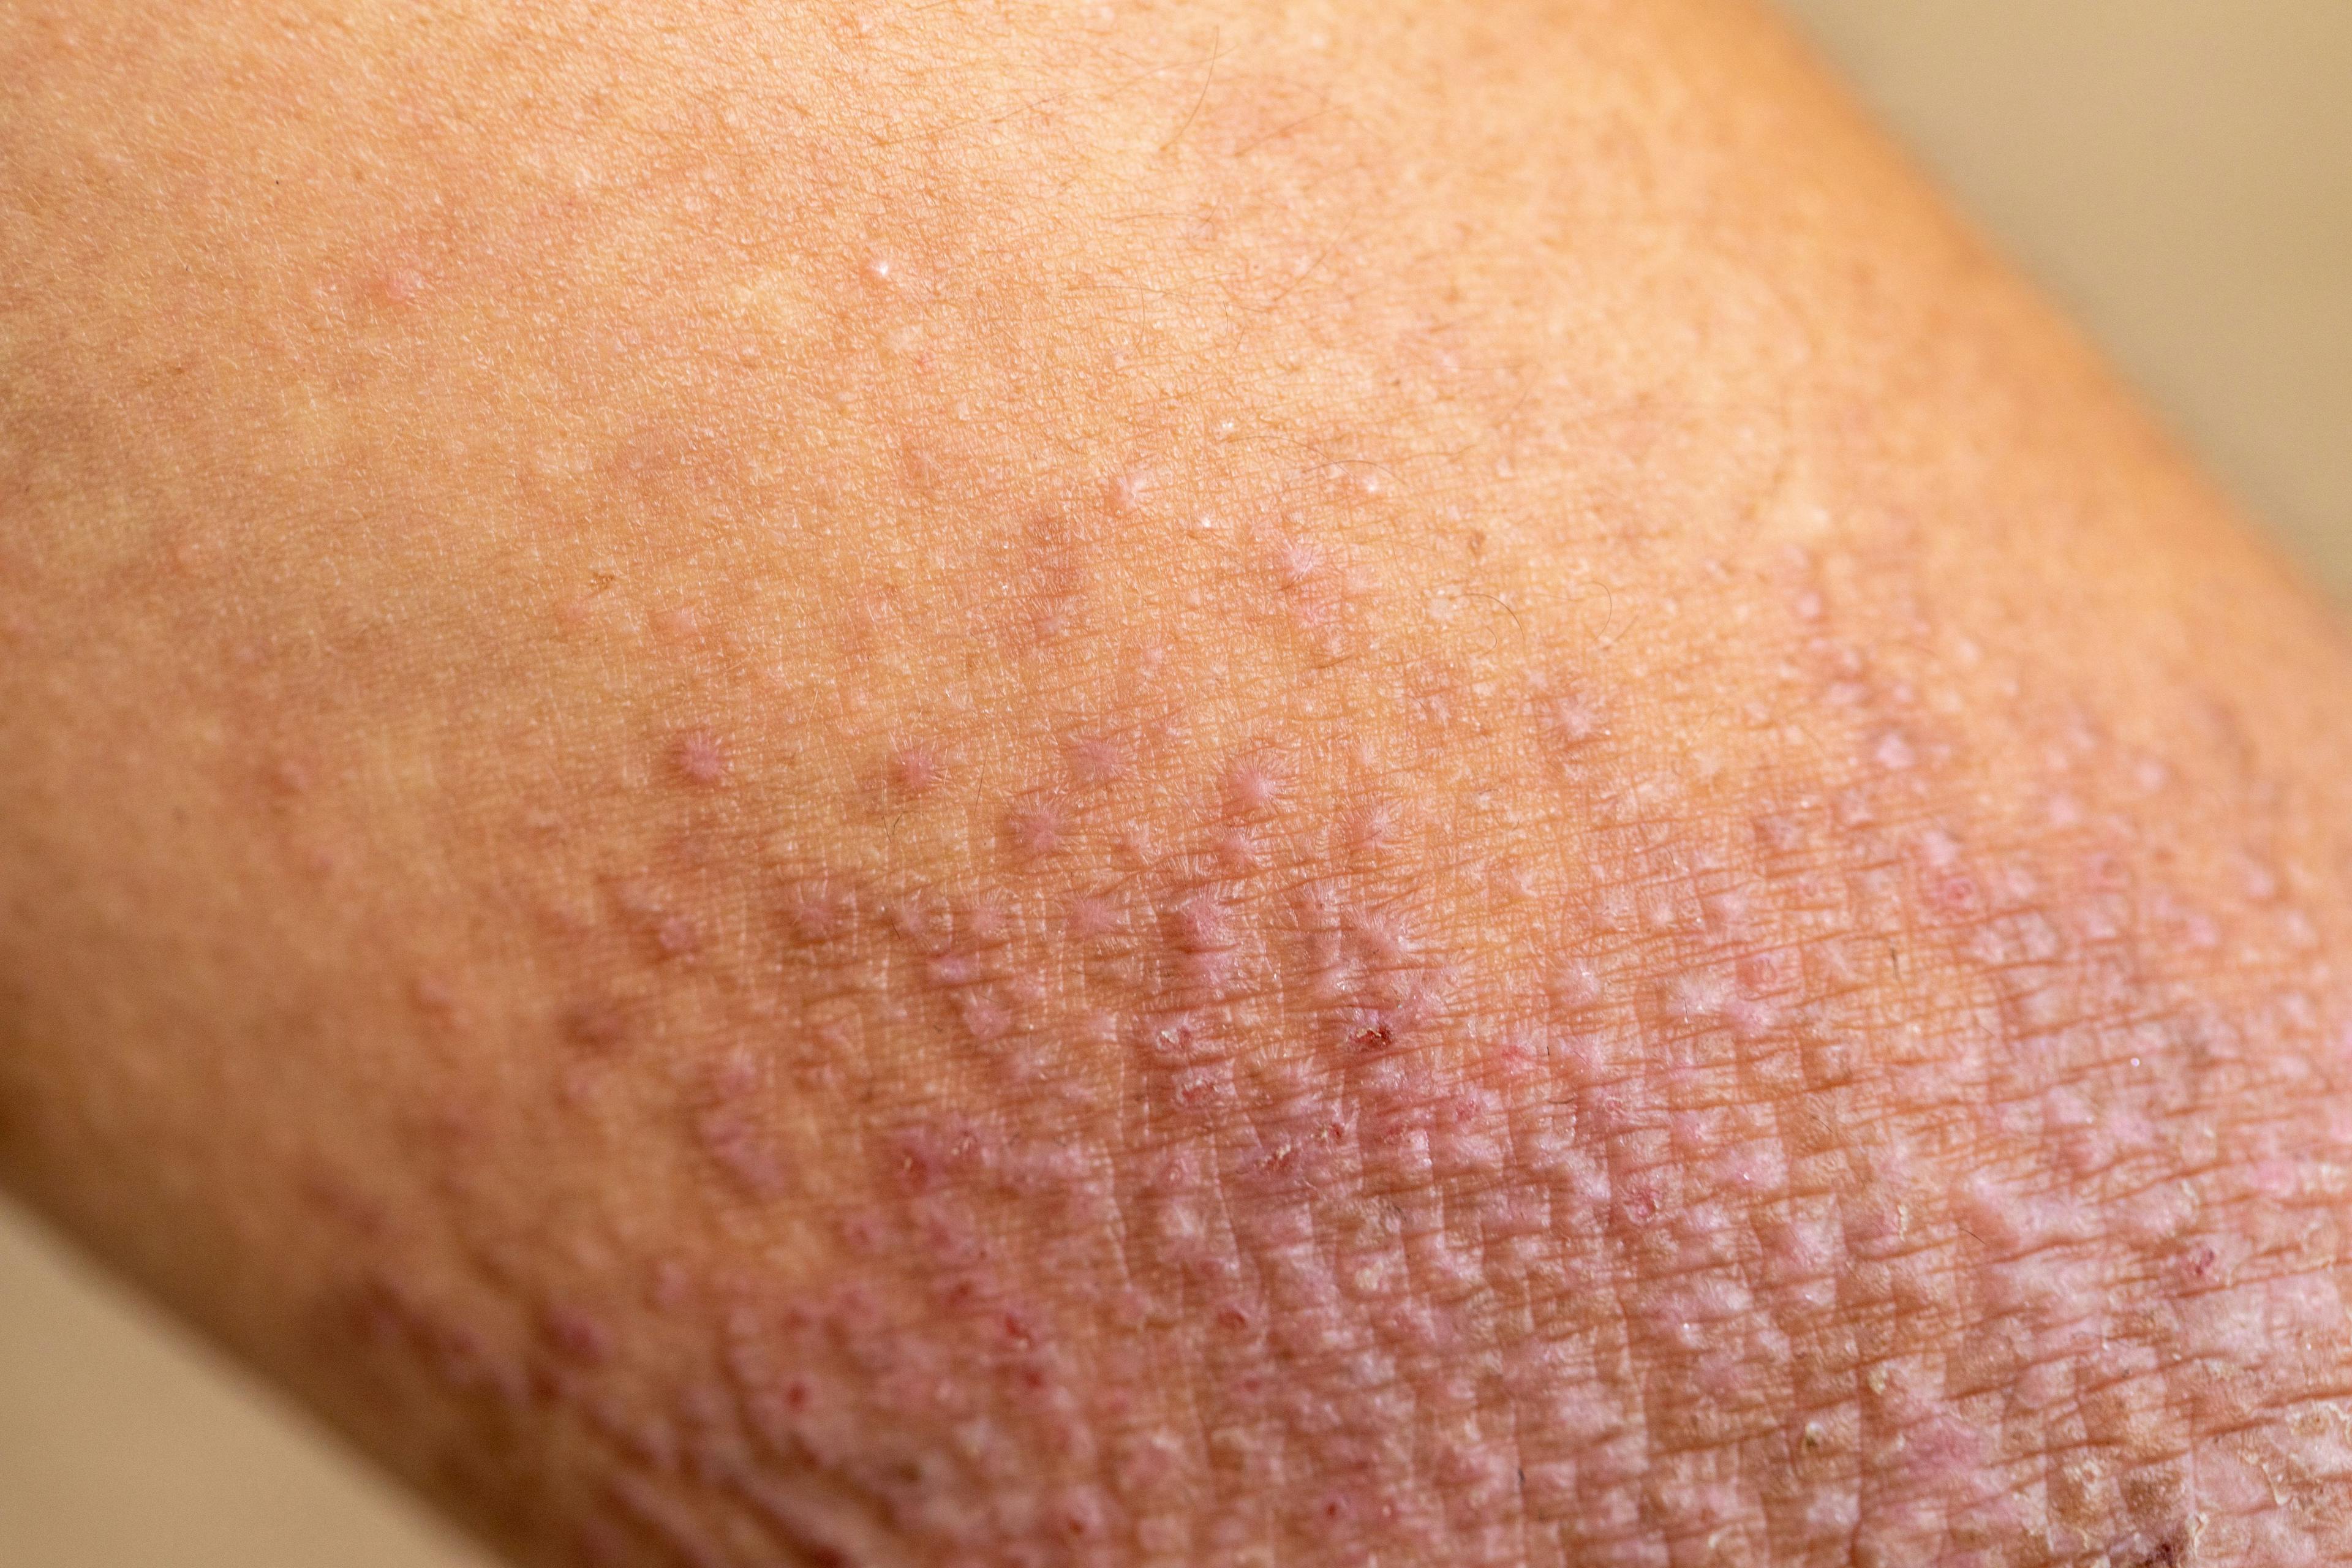 Eczema Lesion Detection Increased With EczemaNet2 Automated Assessment